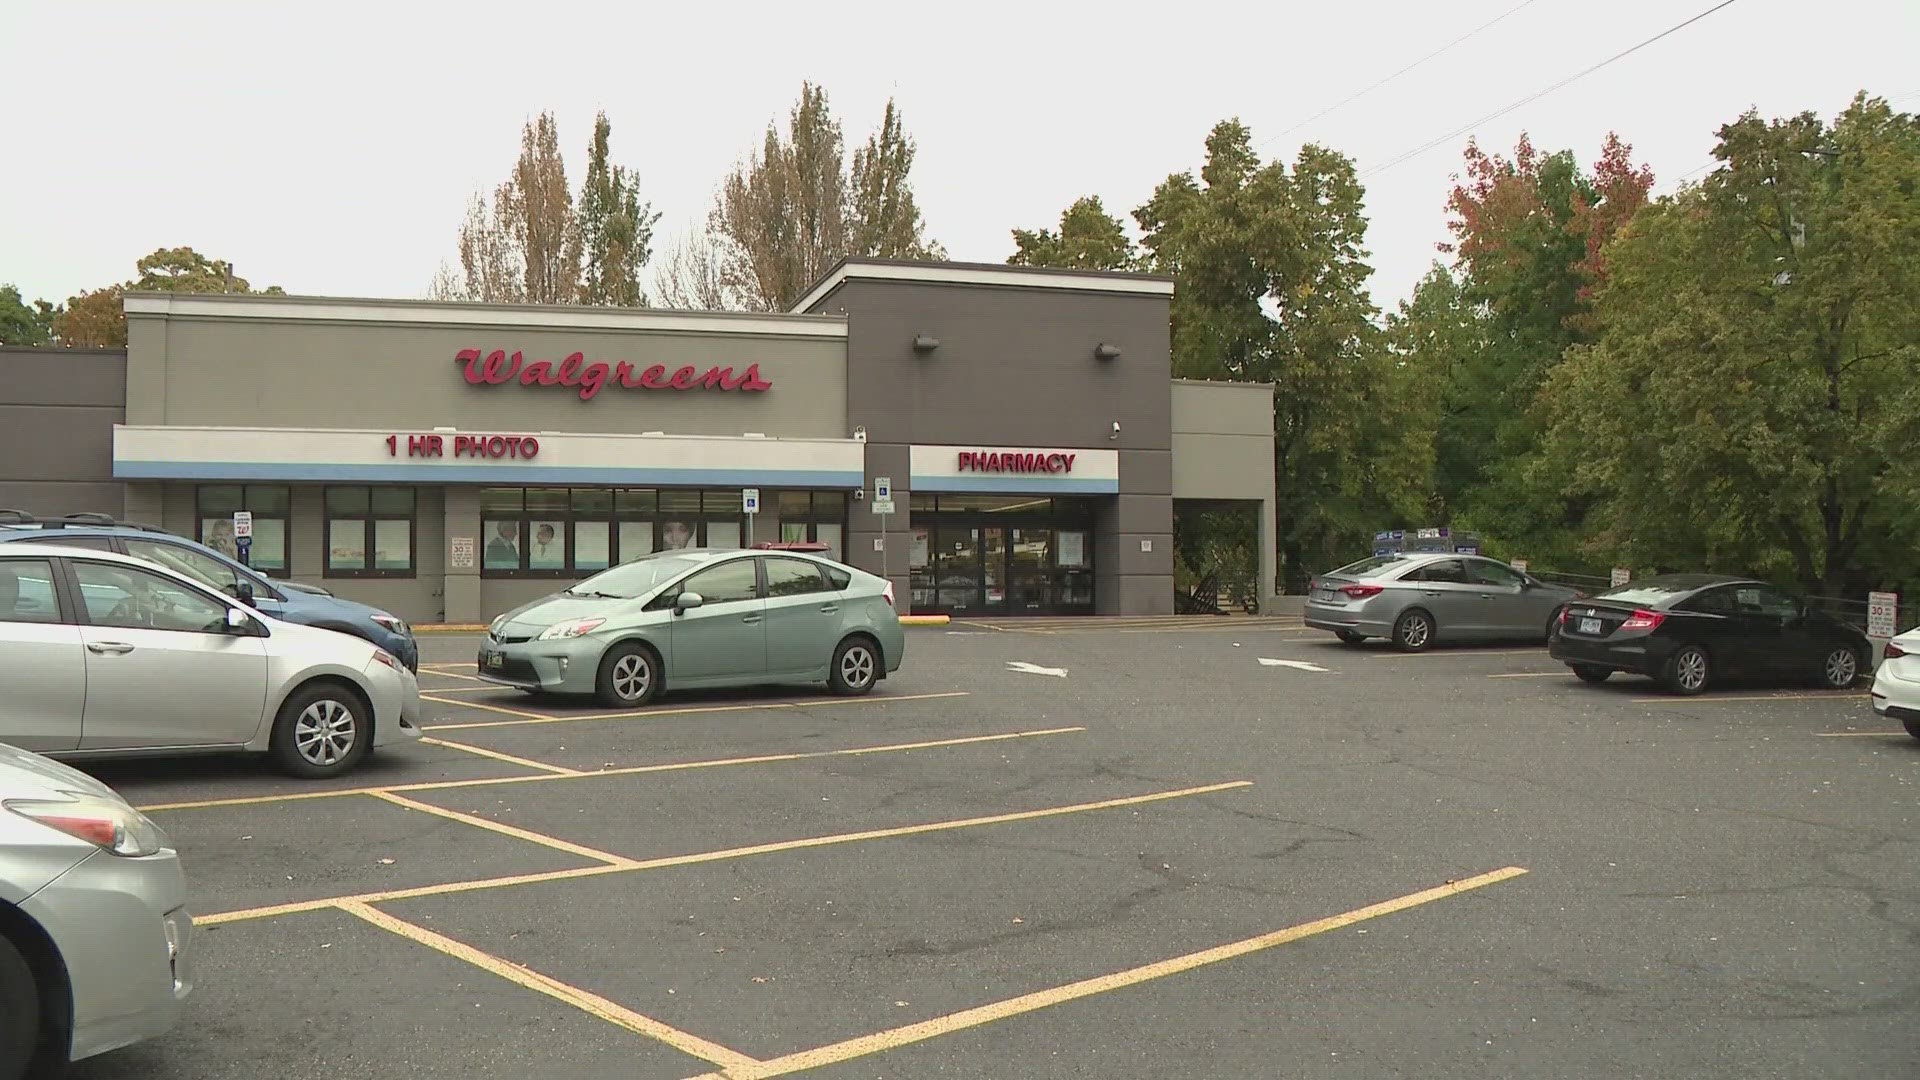 Pharmacy staff at some Walgreens stores walk out as part of nationwide